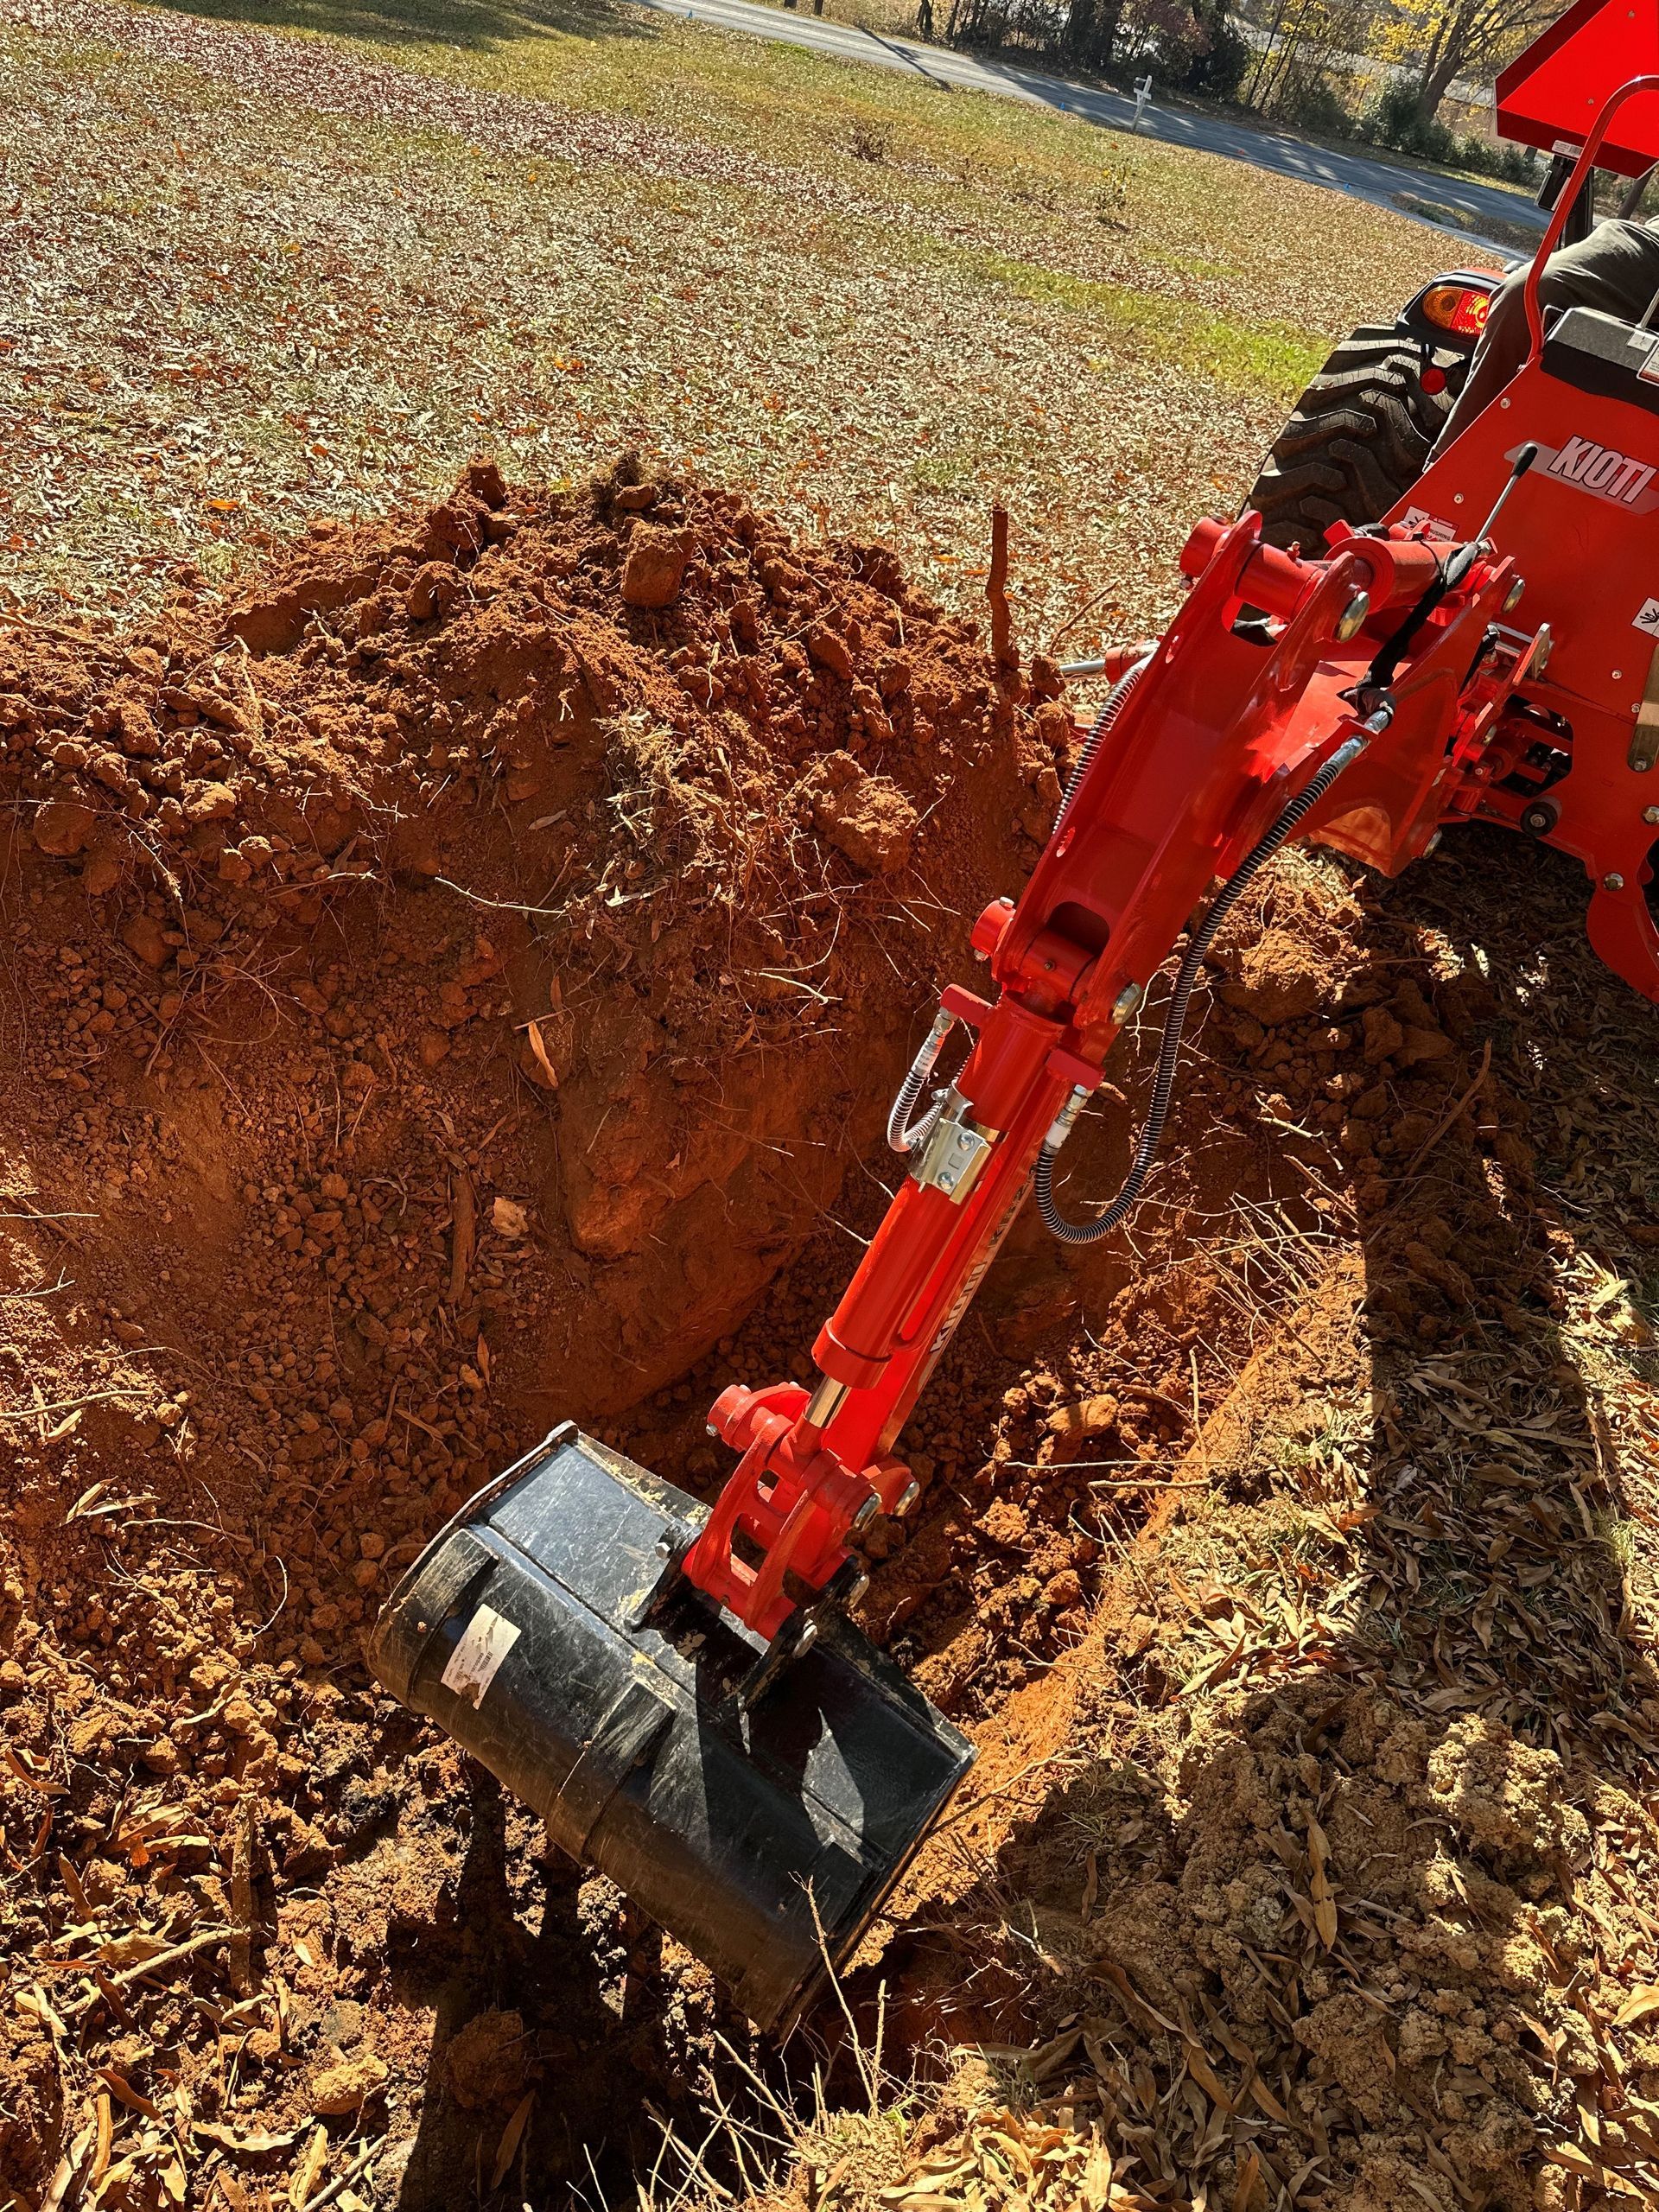 A Red Kubota Tractor Is Digging A Hole In The Dirt - Clemmons, NC - Jetco Septic Service